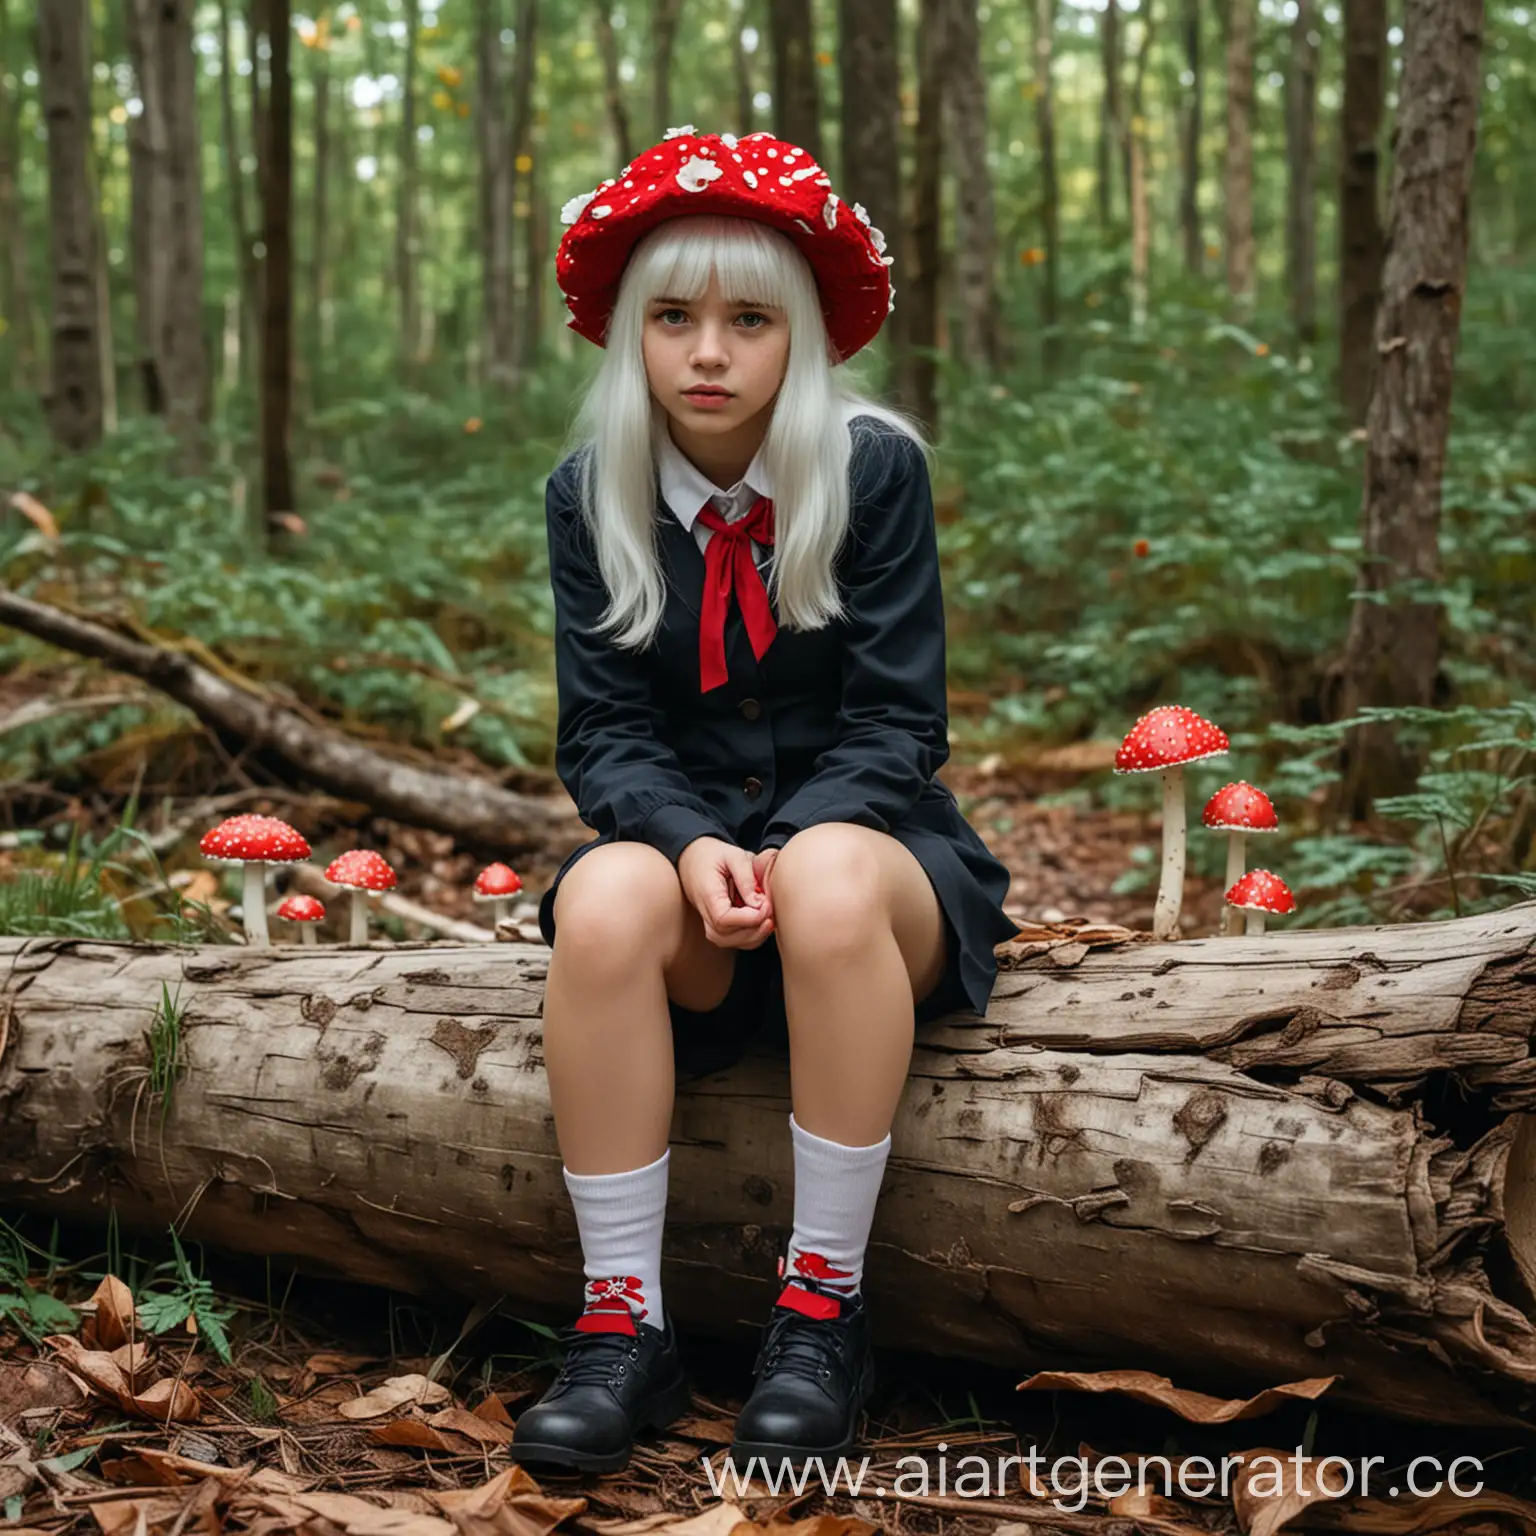 Enchanted-Forest-Encounter-WhiteHaired-Girl-in-Fly-Agaric-Hat-and-School-Uniform